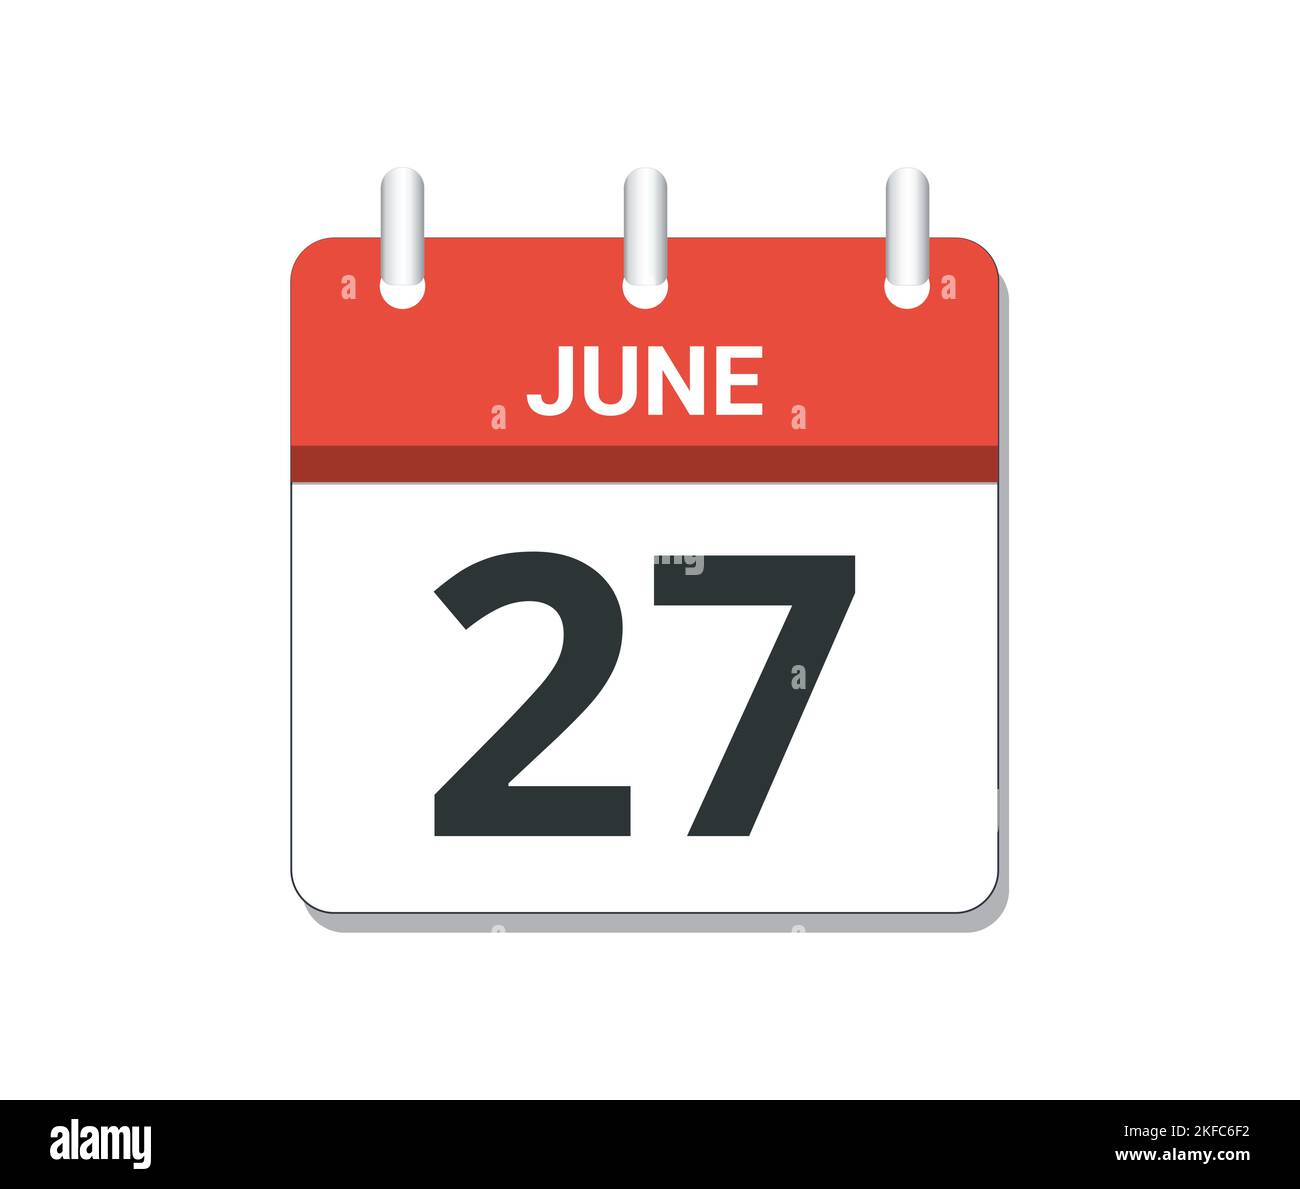 June 27th calendar icon vector. Concept of schedule, business and tasks Stock Vector